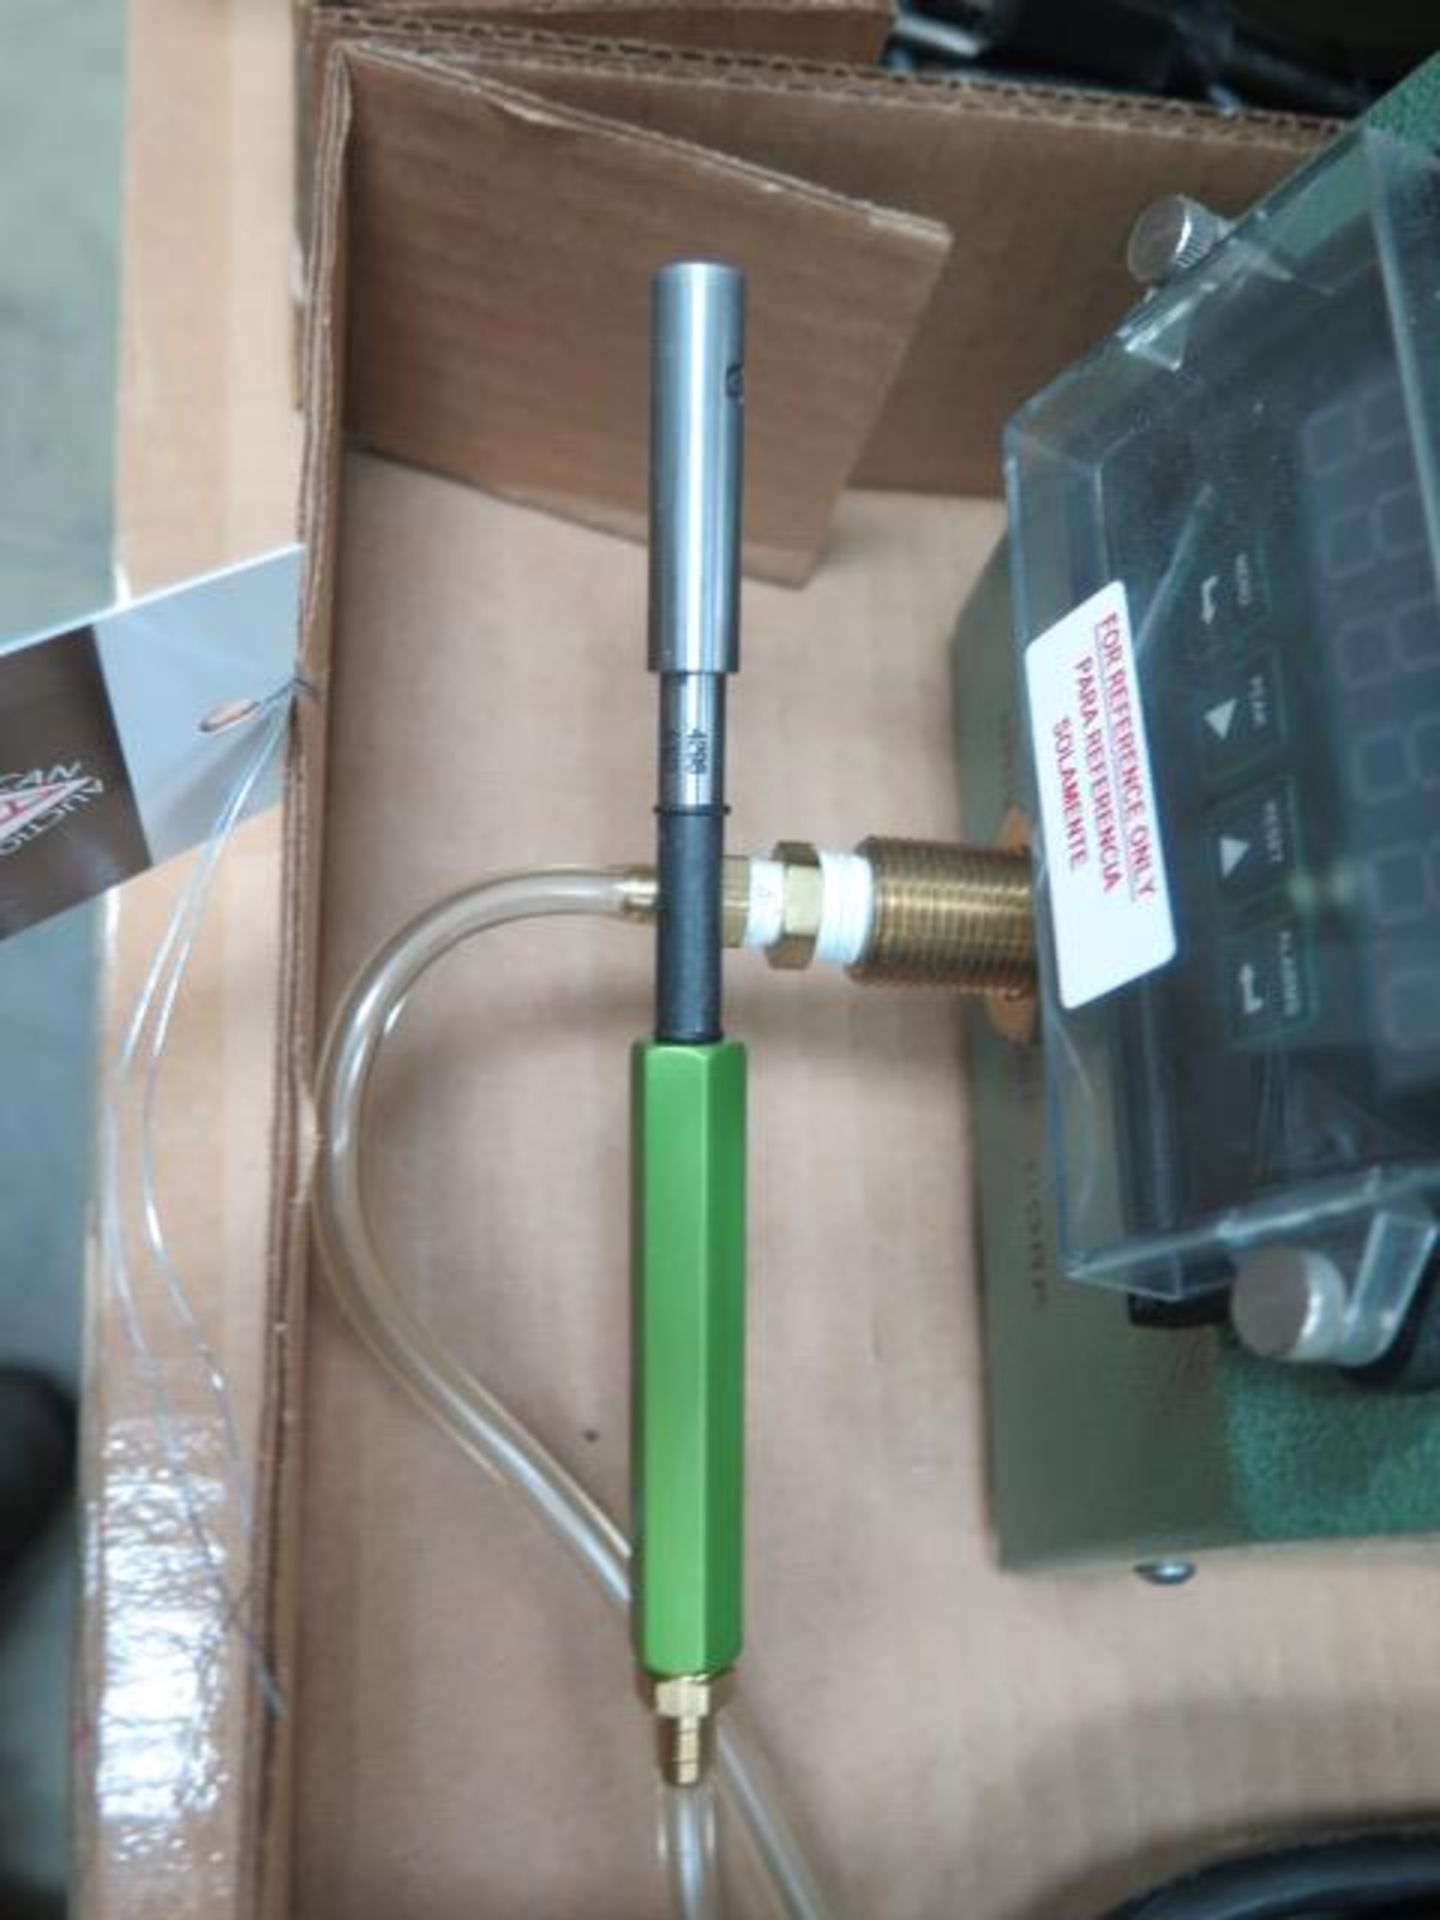 Universal Gage Corp mdl. DR-1 Universal Digital Air Gage (SOLD AS-IS - NO WARRANTY) - Image 4 of 6